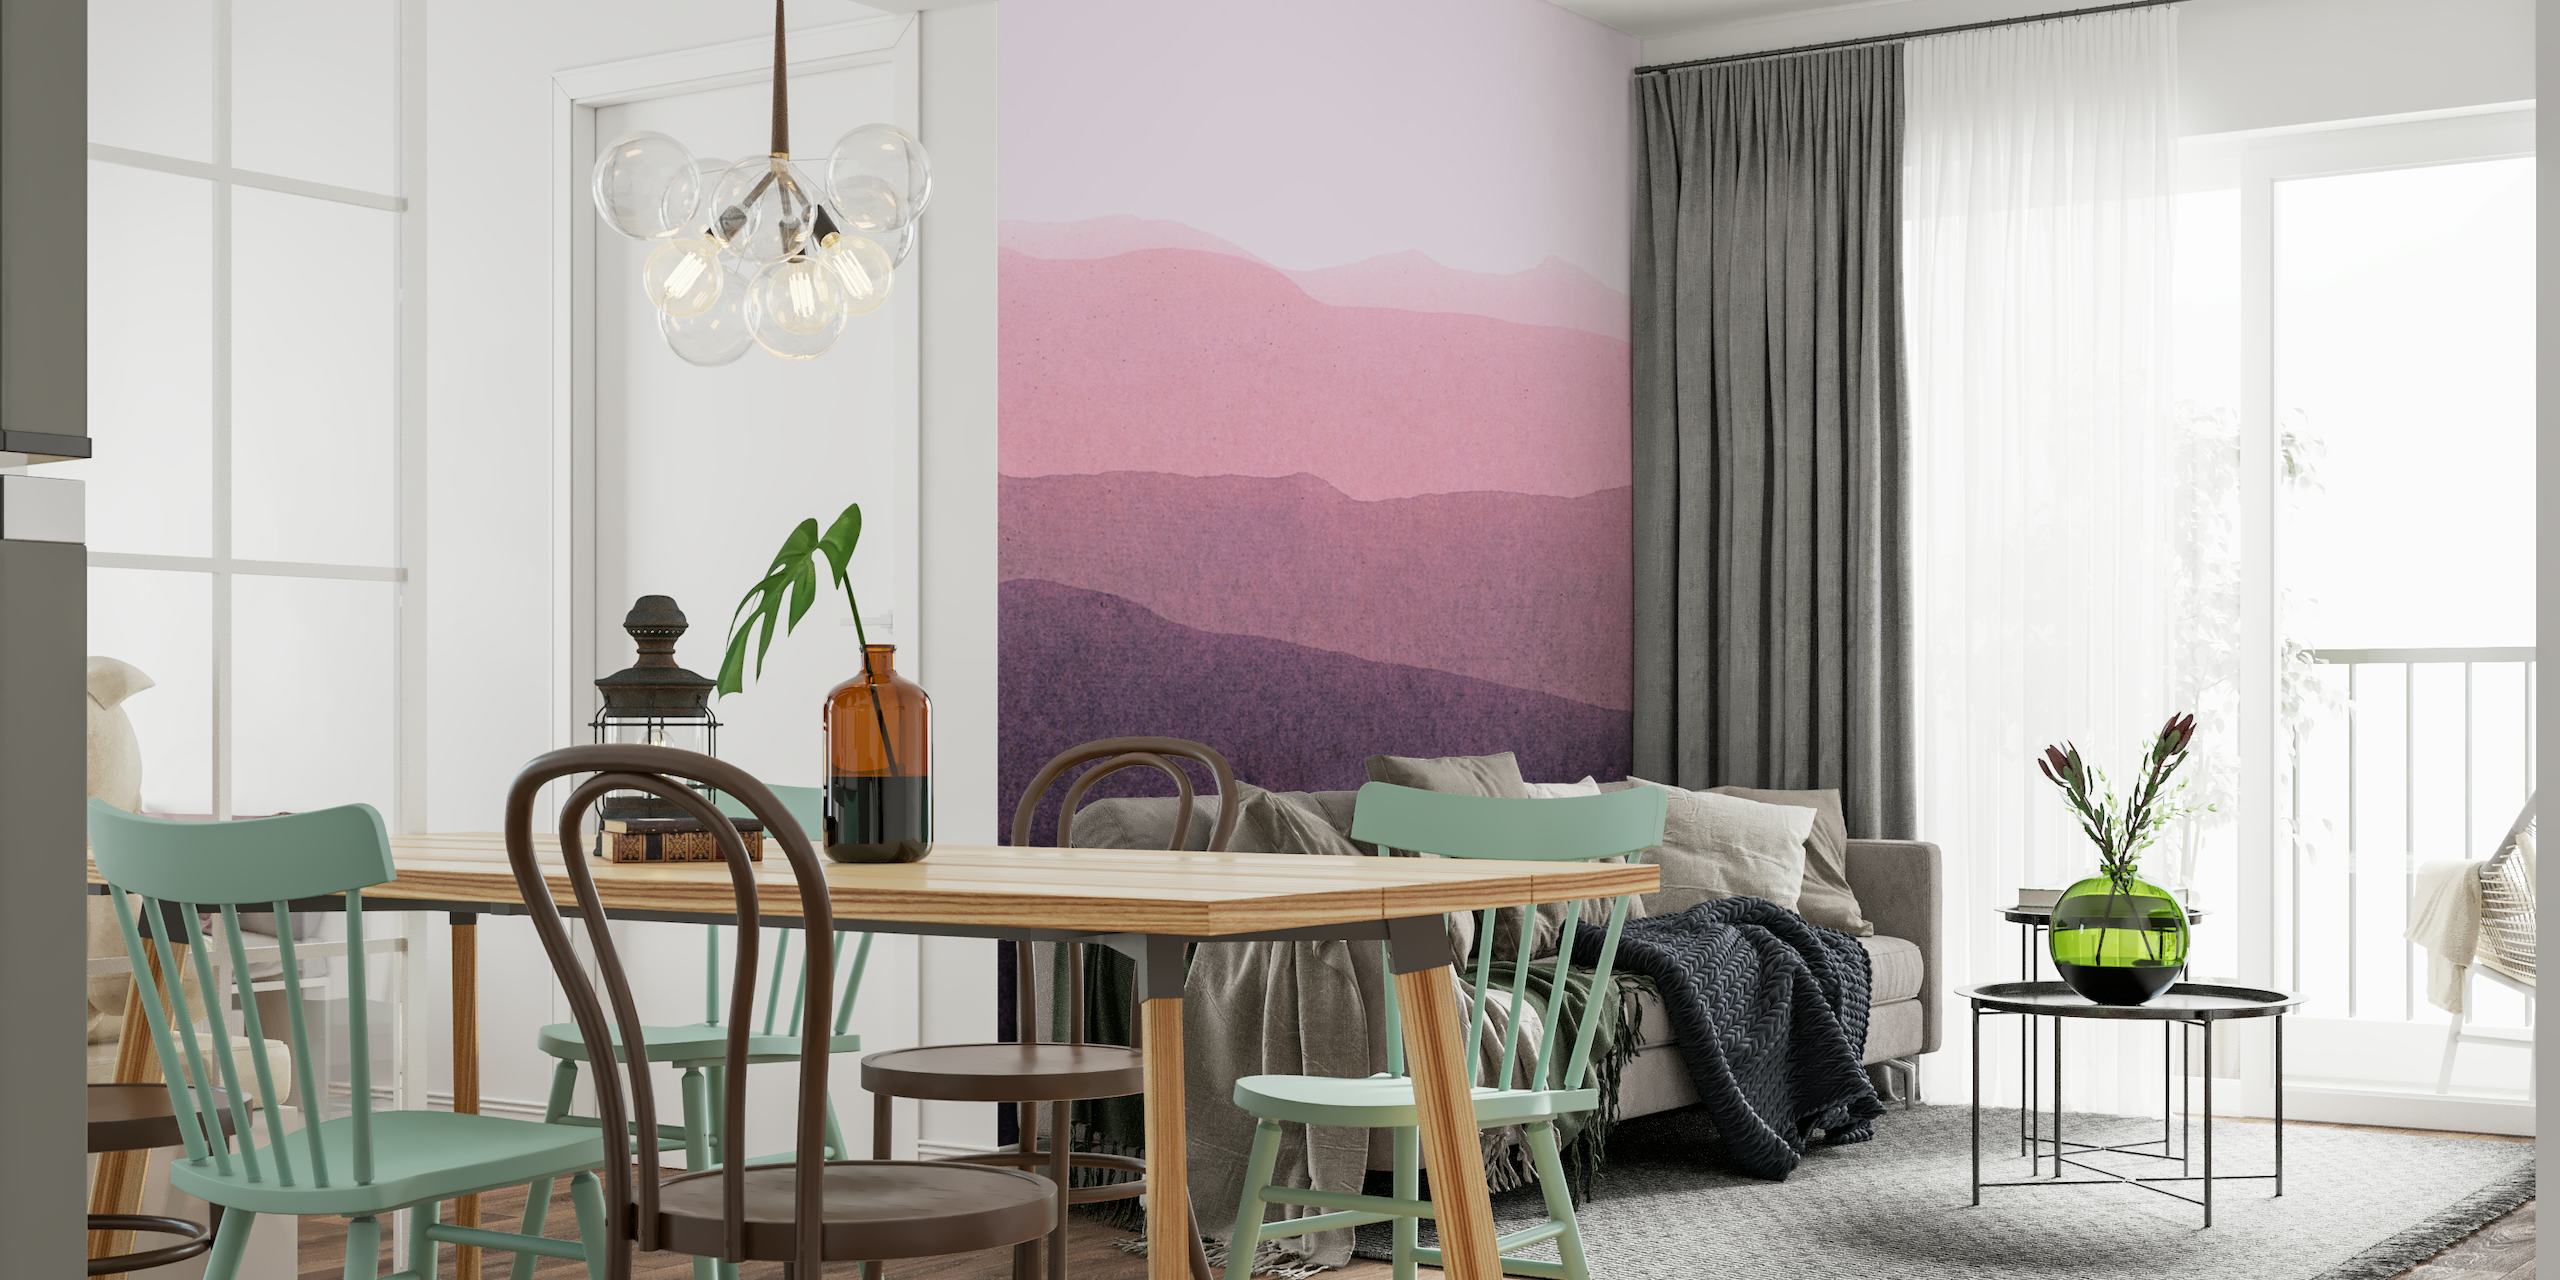 A wall mural showing a serene gradient landscape with overlapping hills in shades of dusky pink to deep purple